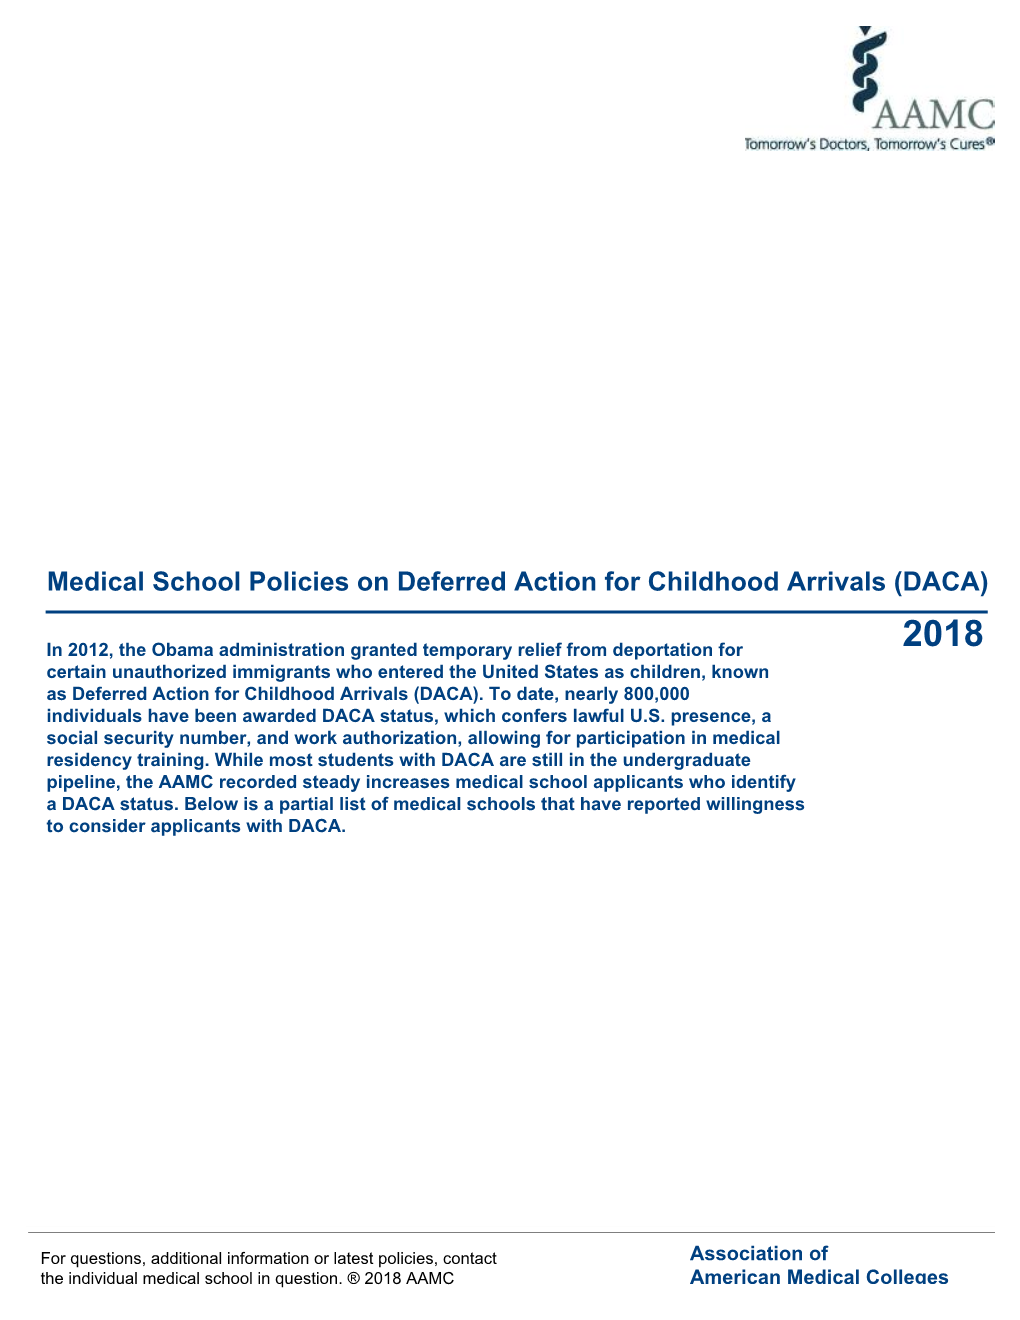 Medical School Policies on Deferred Action for Childhood Arrivals (DACA)